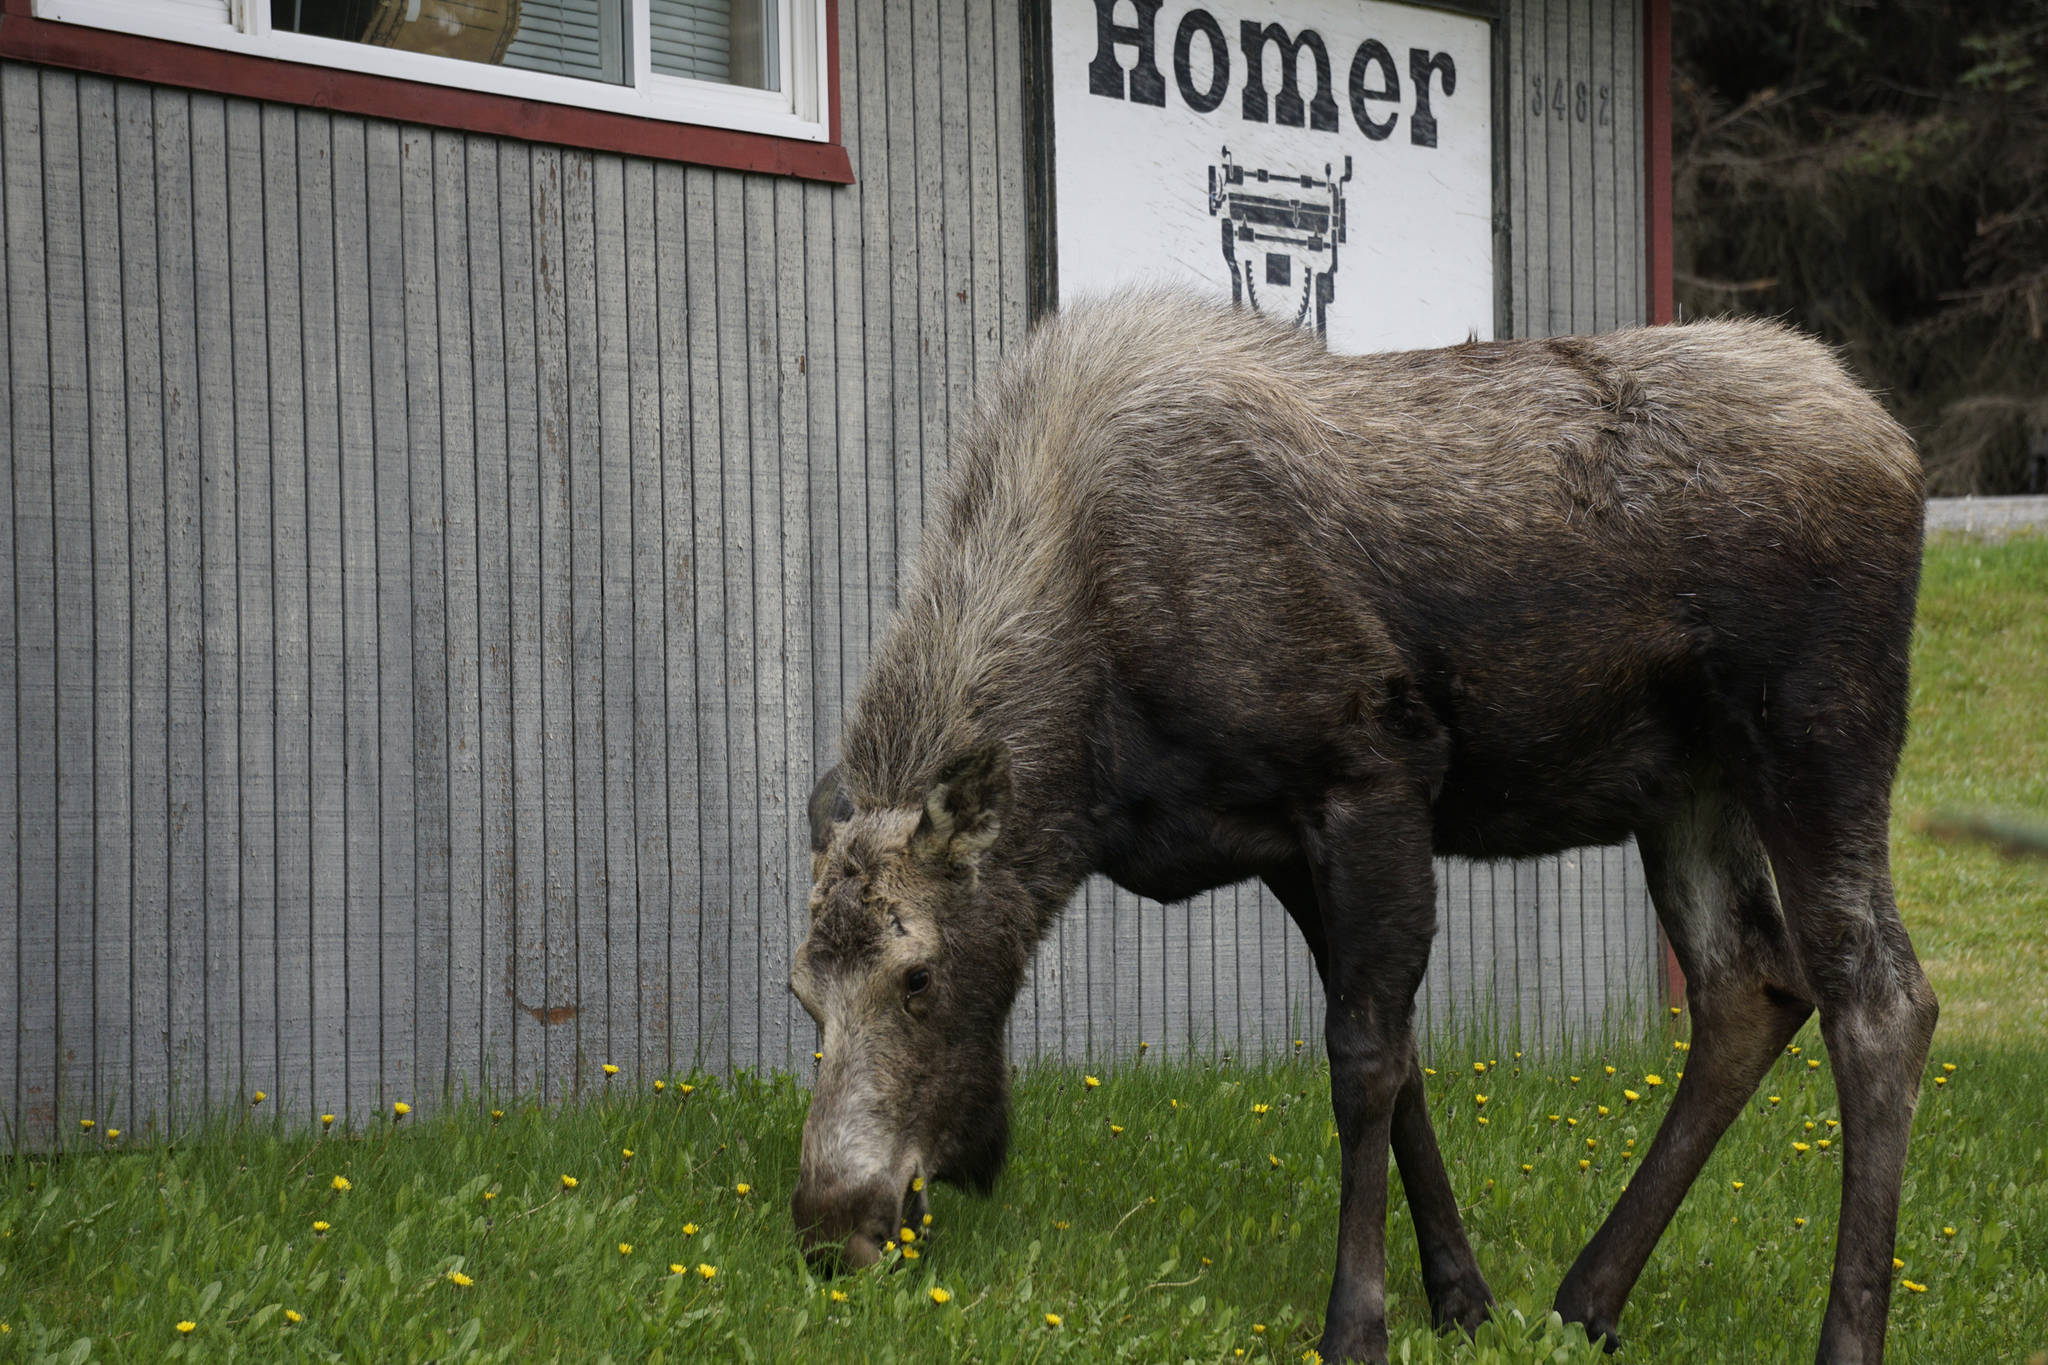 A moose browses on the lawn of the Homer News on May 15, 2019, in Homer, Alaska. (Photo by Michael Armstrong/Homer News)